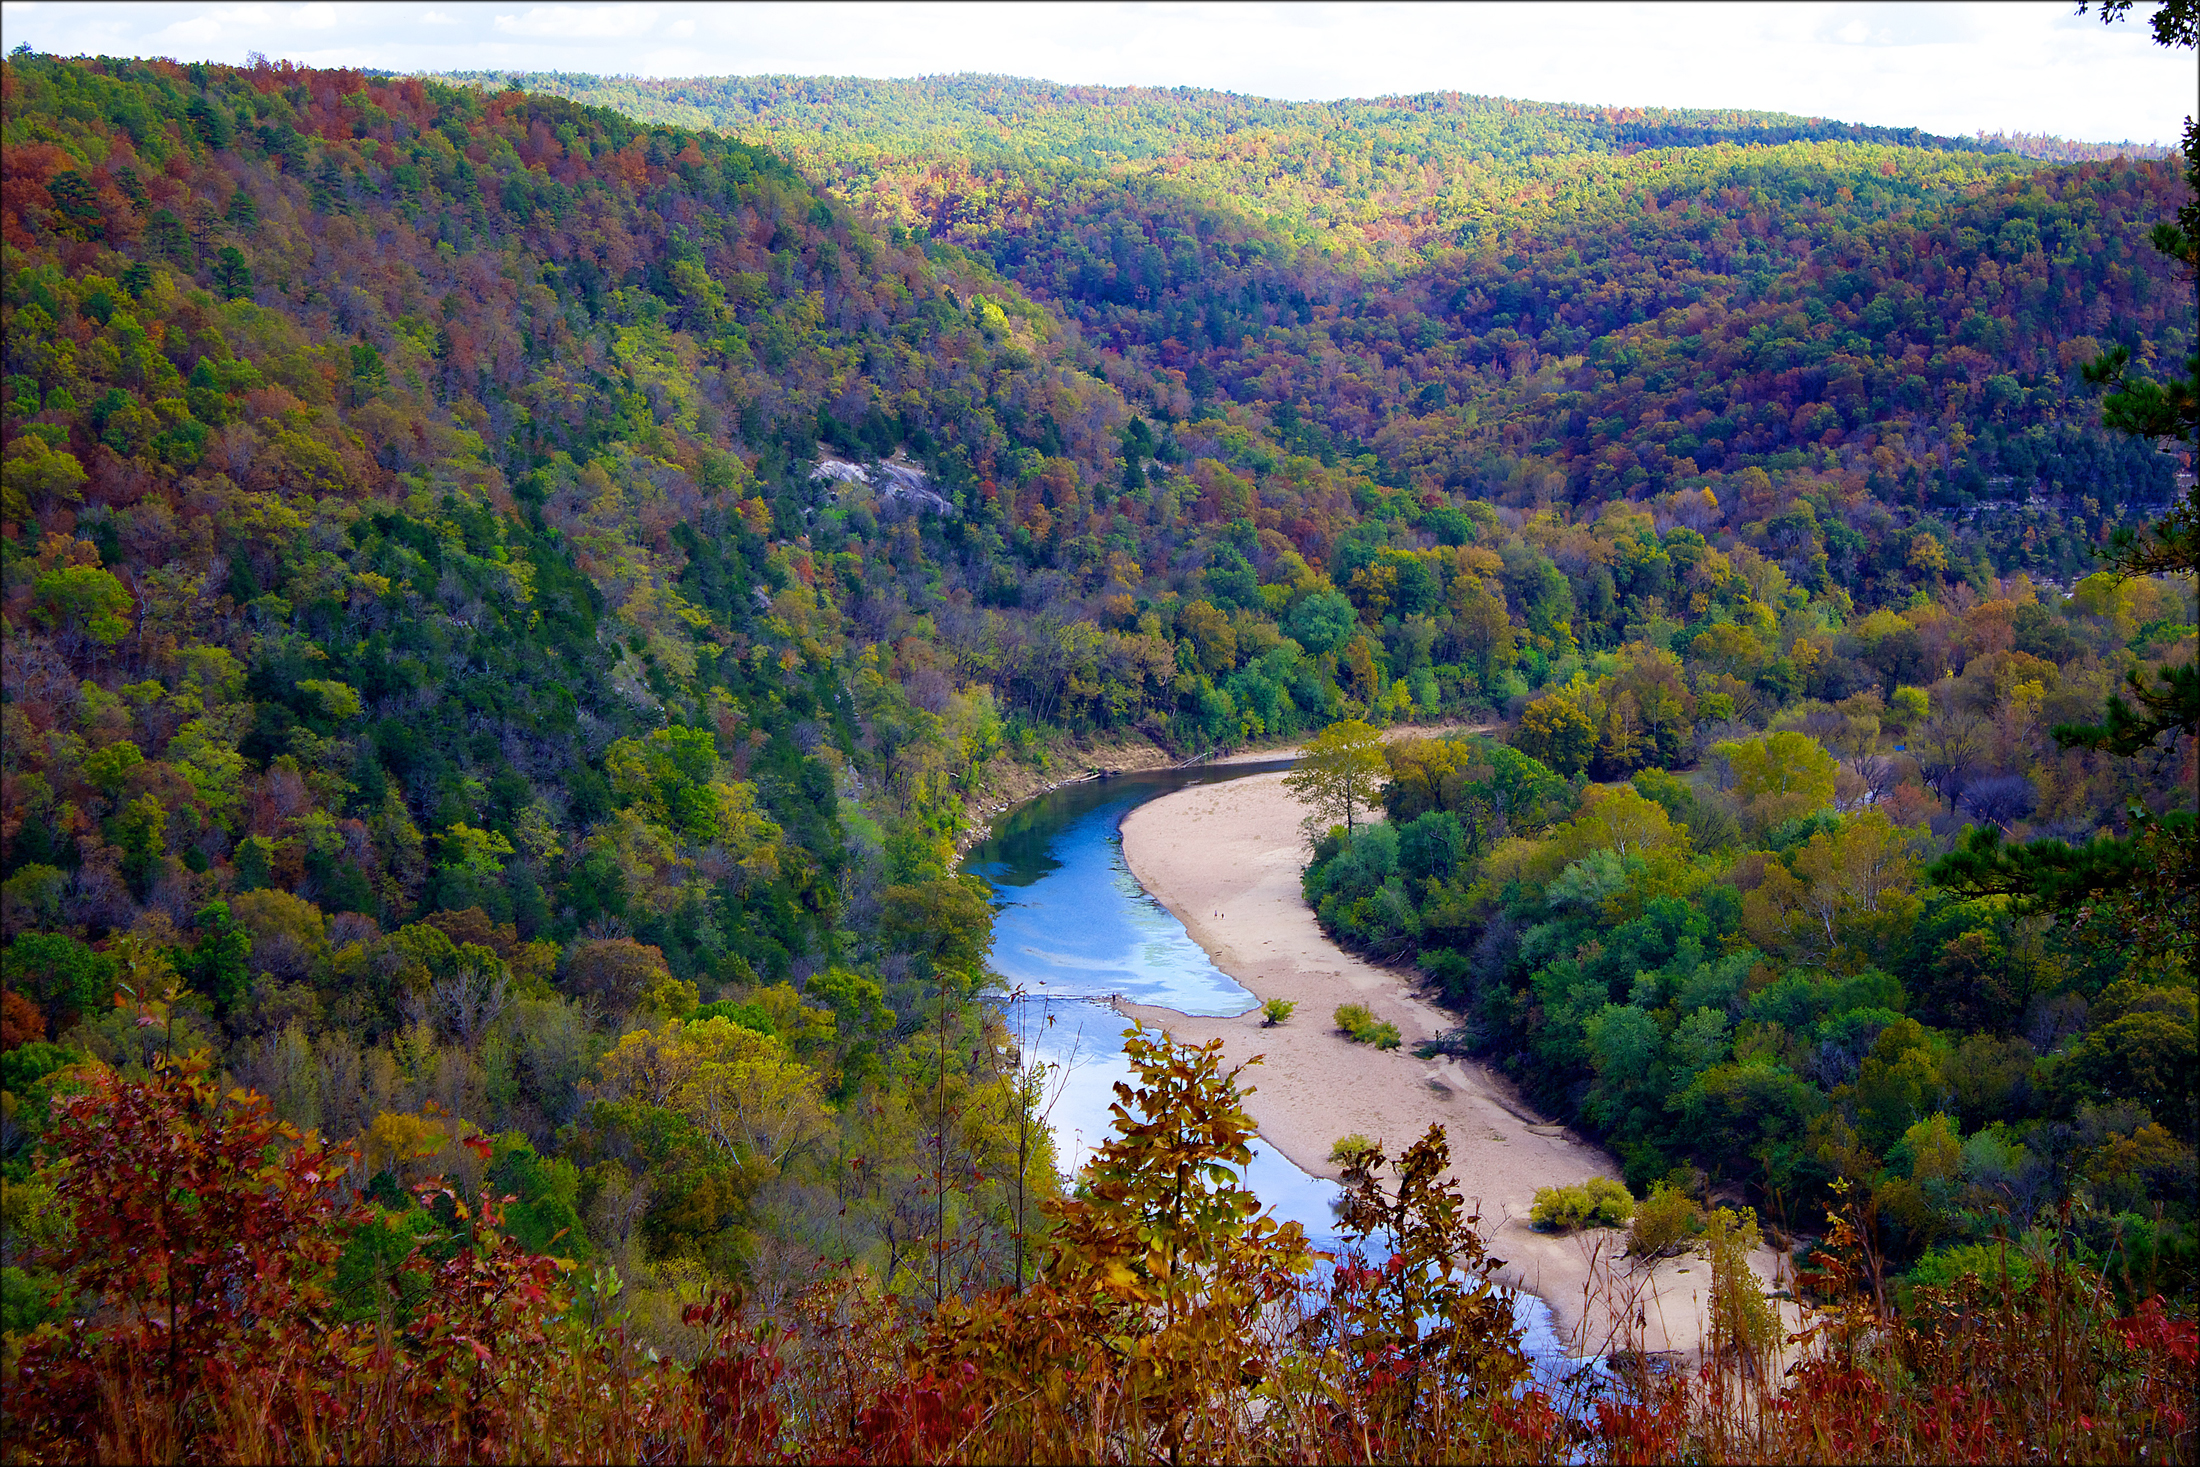 Buffalo River goes through the center of the photo will fall foliage creating an explosive burst of color around it on rolling hills.